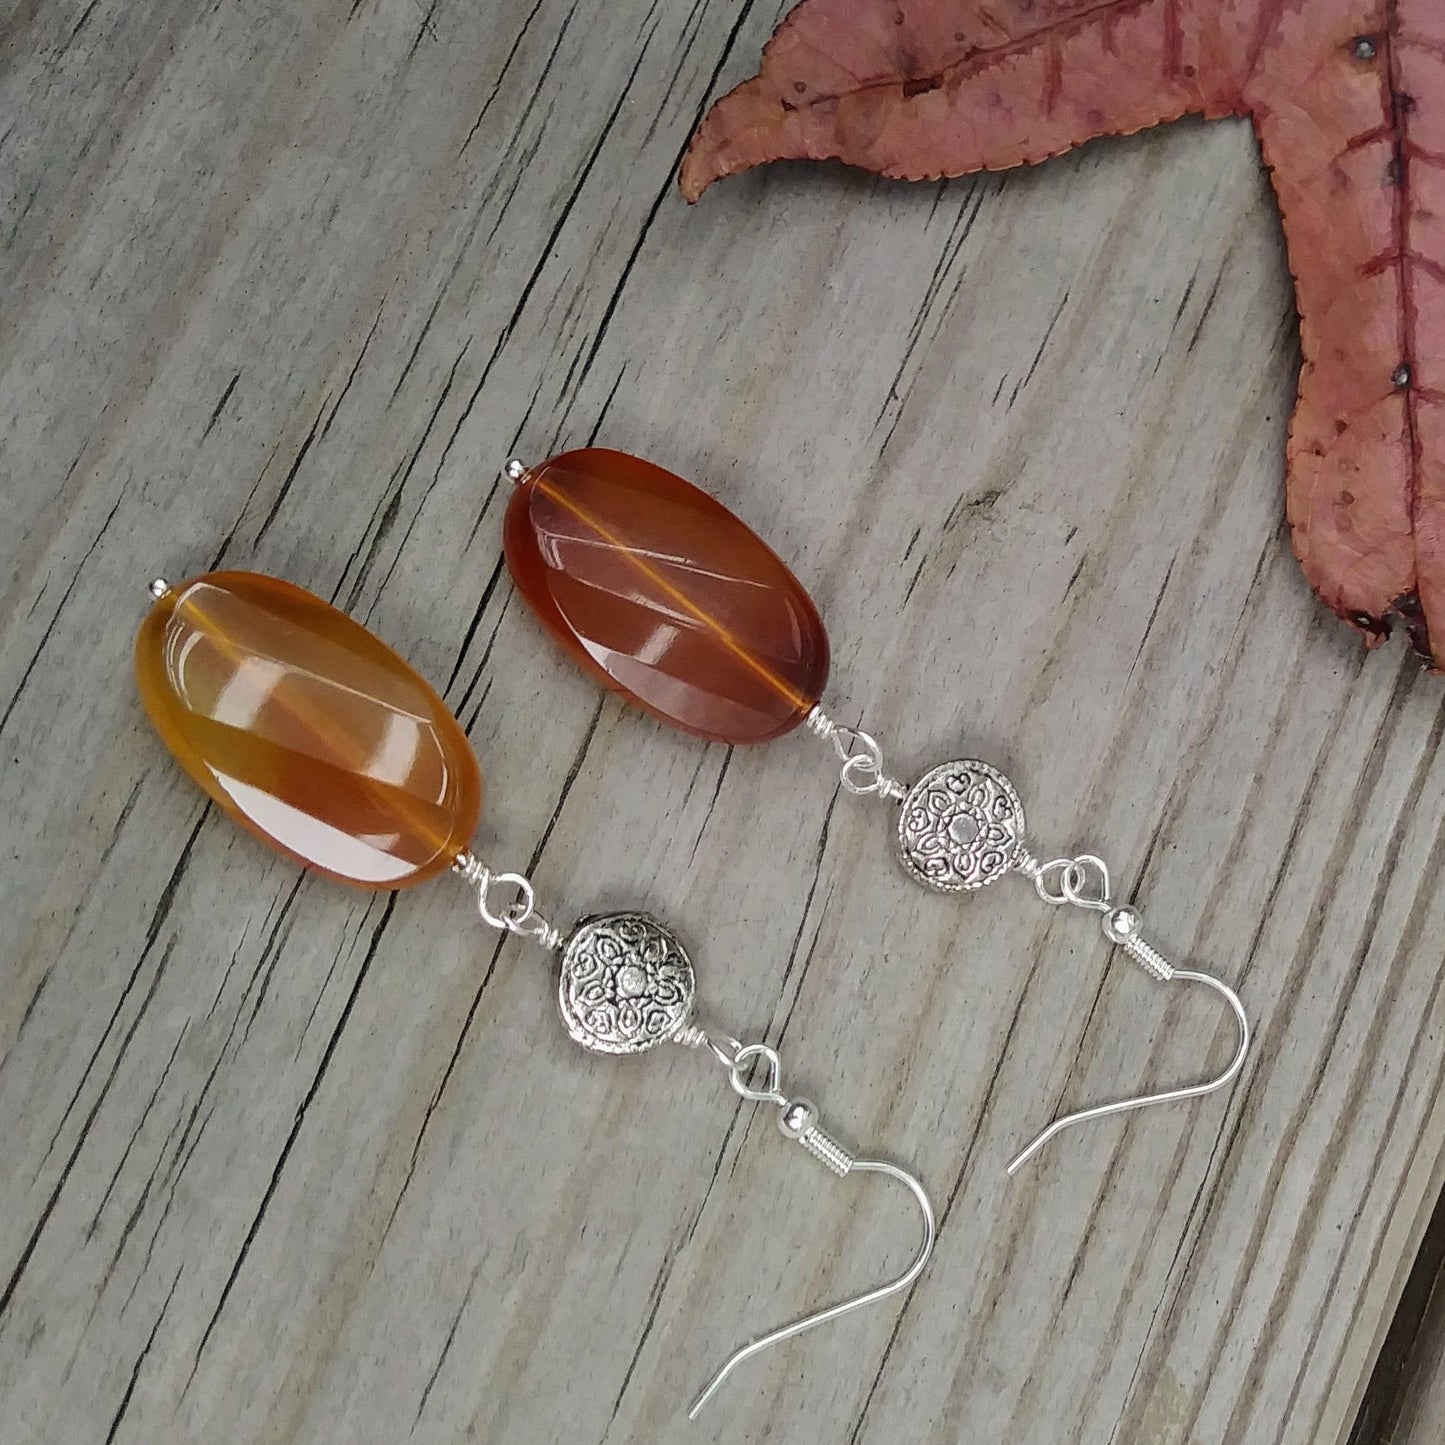 Upcycled Faceted Amber-Colored Gemstone & Patterned Silver Statement Earrings